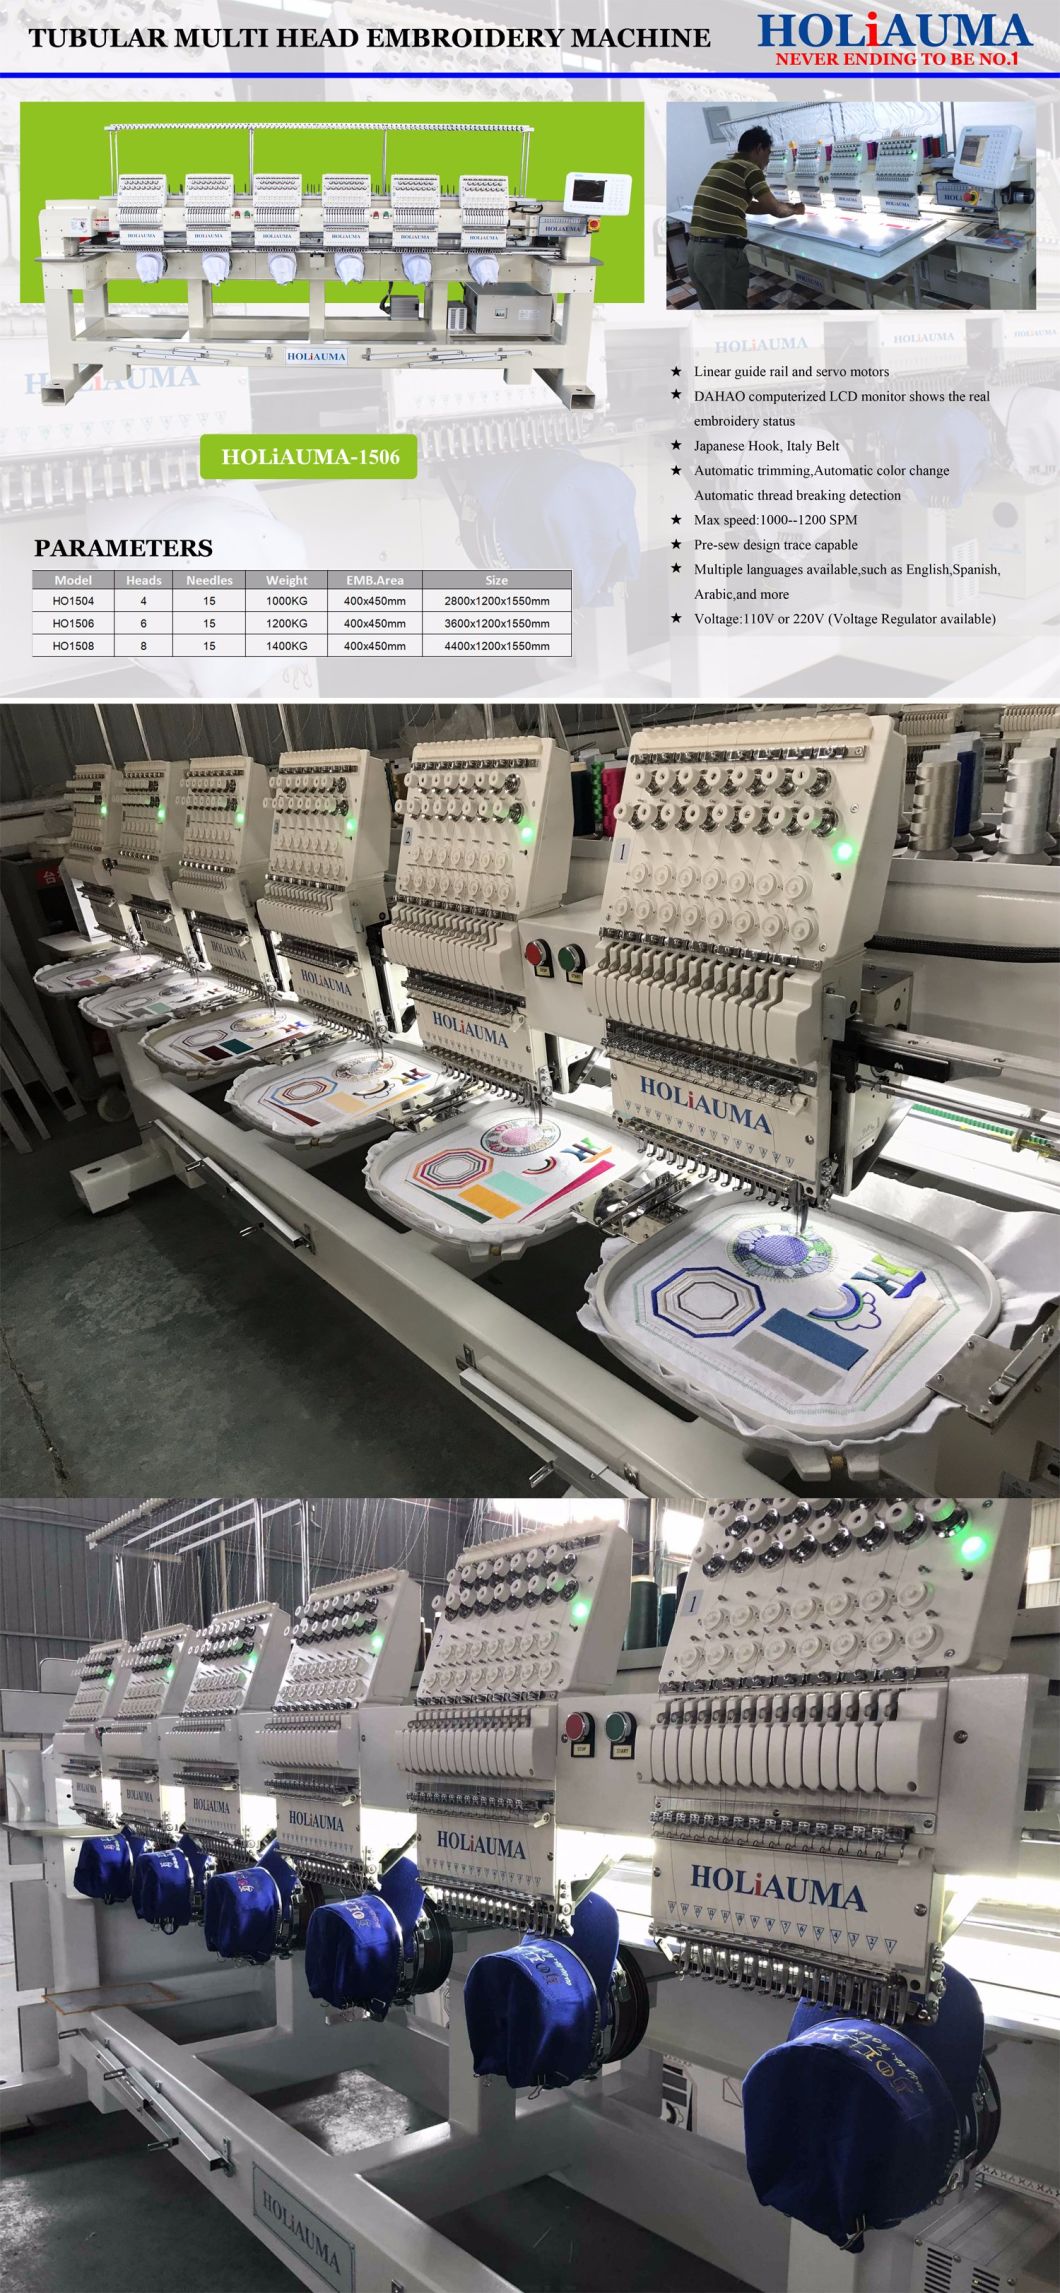 Holiauma Newest 6 Head Quilting Machine Computerized for High Speed Embroidery Machine Functions for T Shirt Embroidery Machine